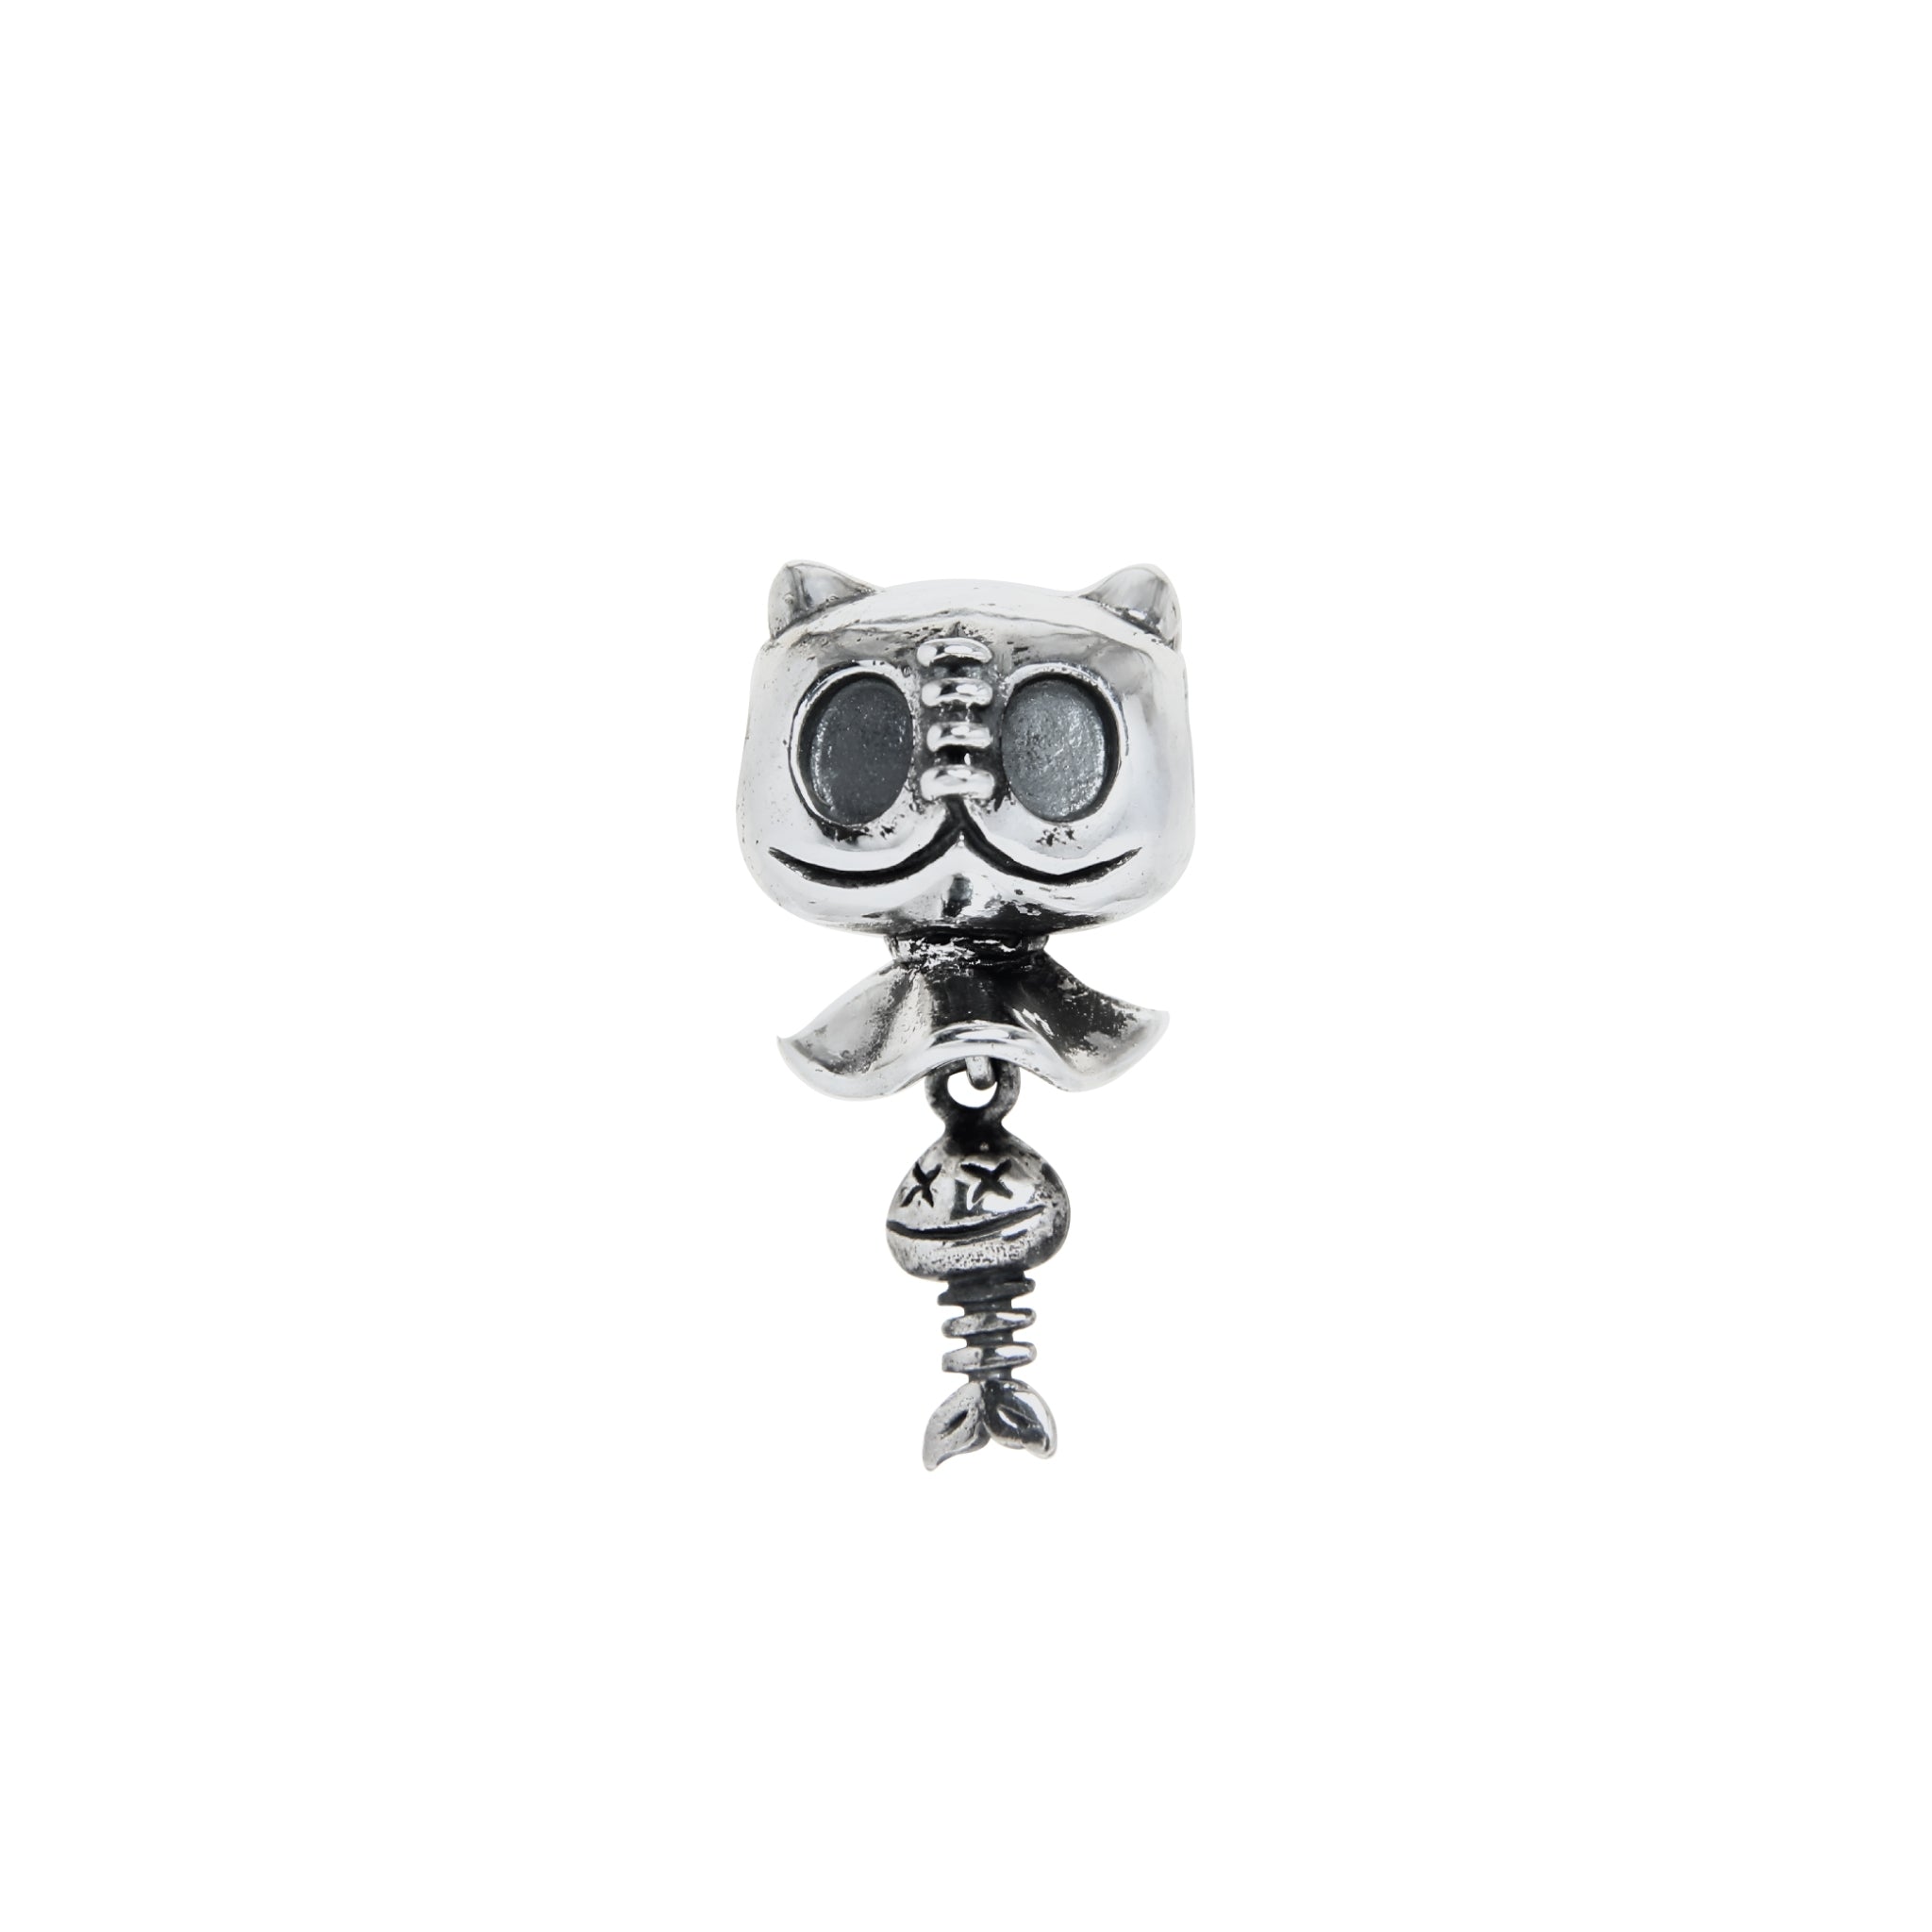 Mr. Whisker the Cat Ghost Bead